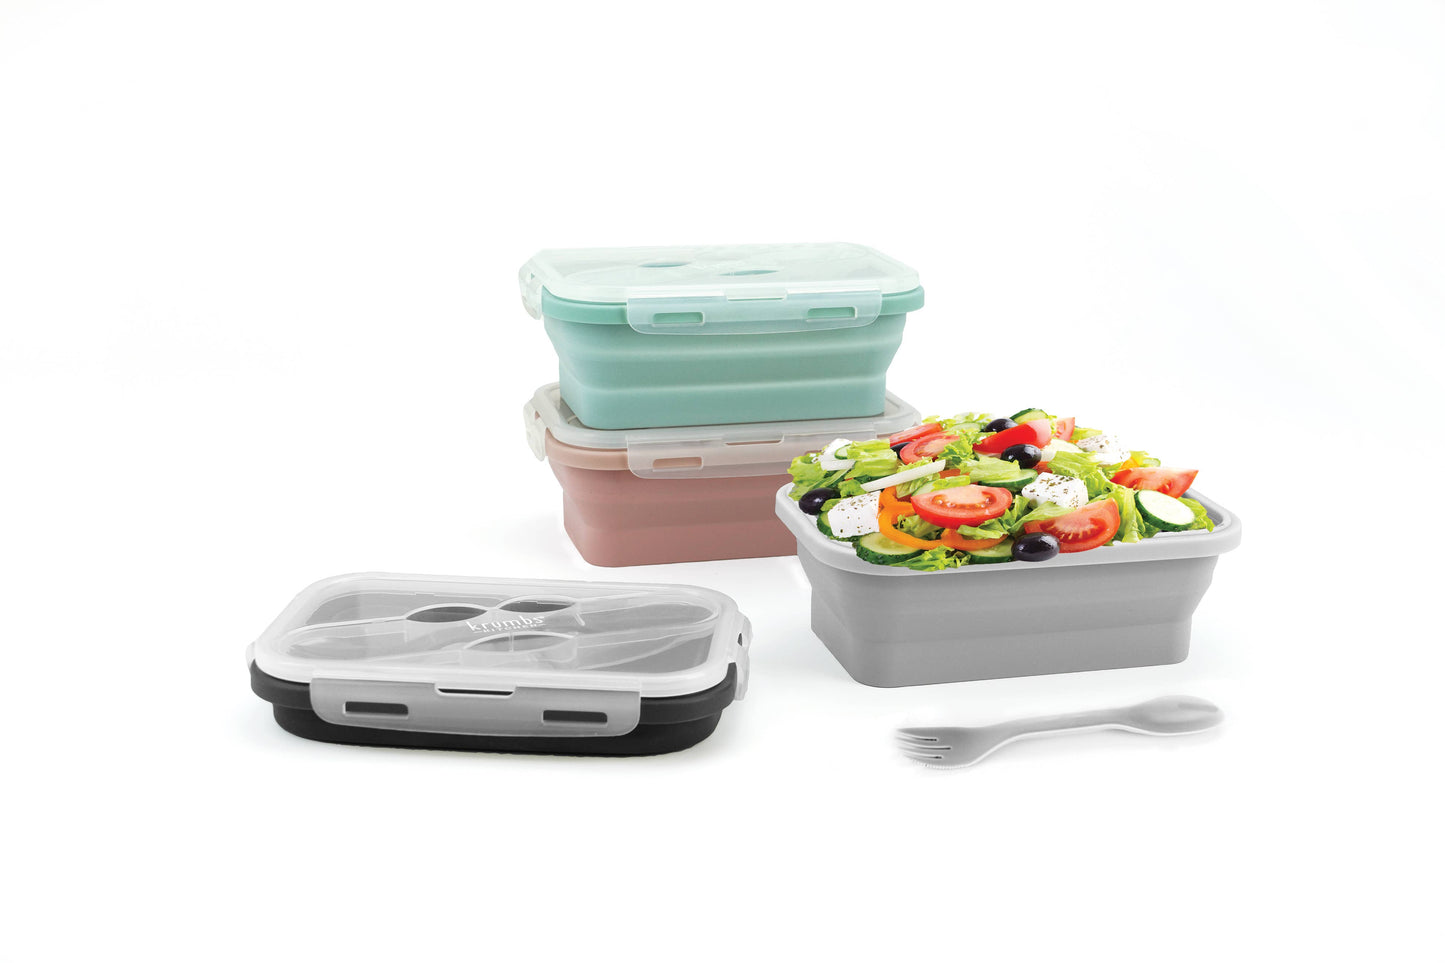 Krumbs Kitchen Mint Silicone Collapsible Lunch Container